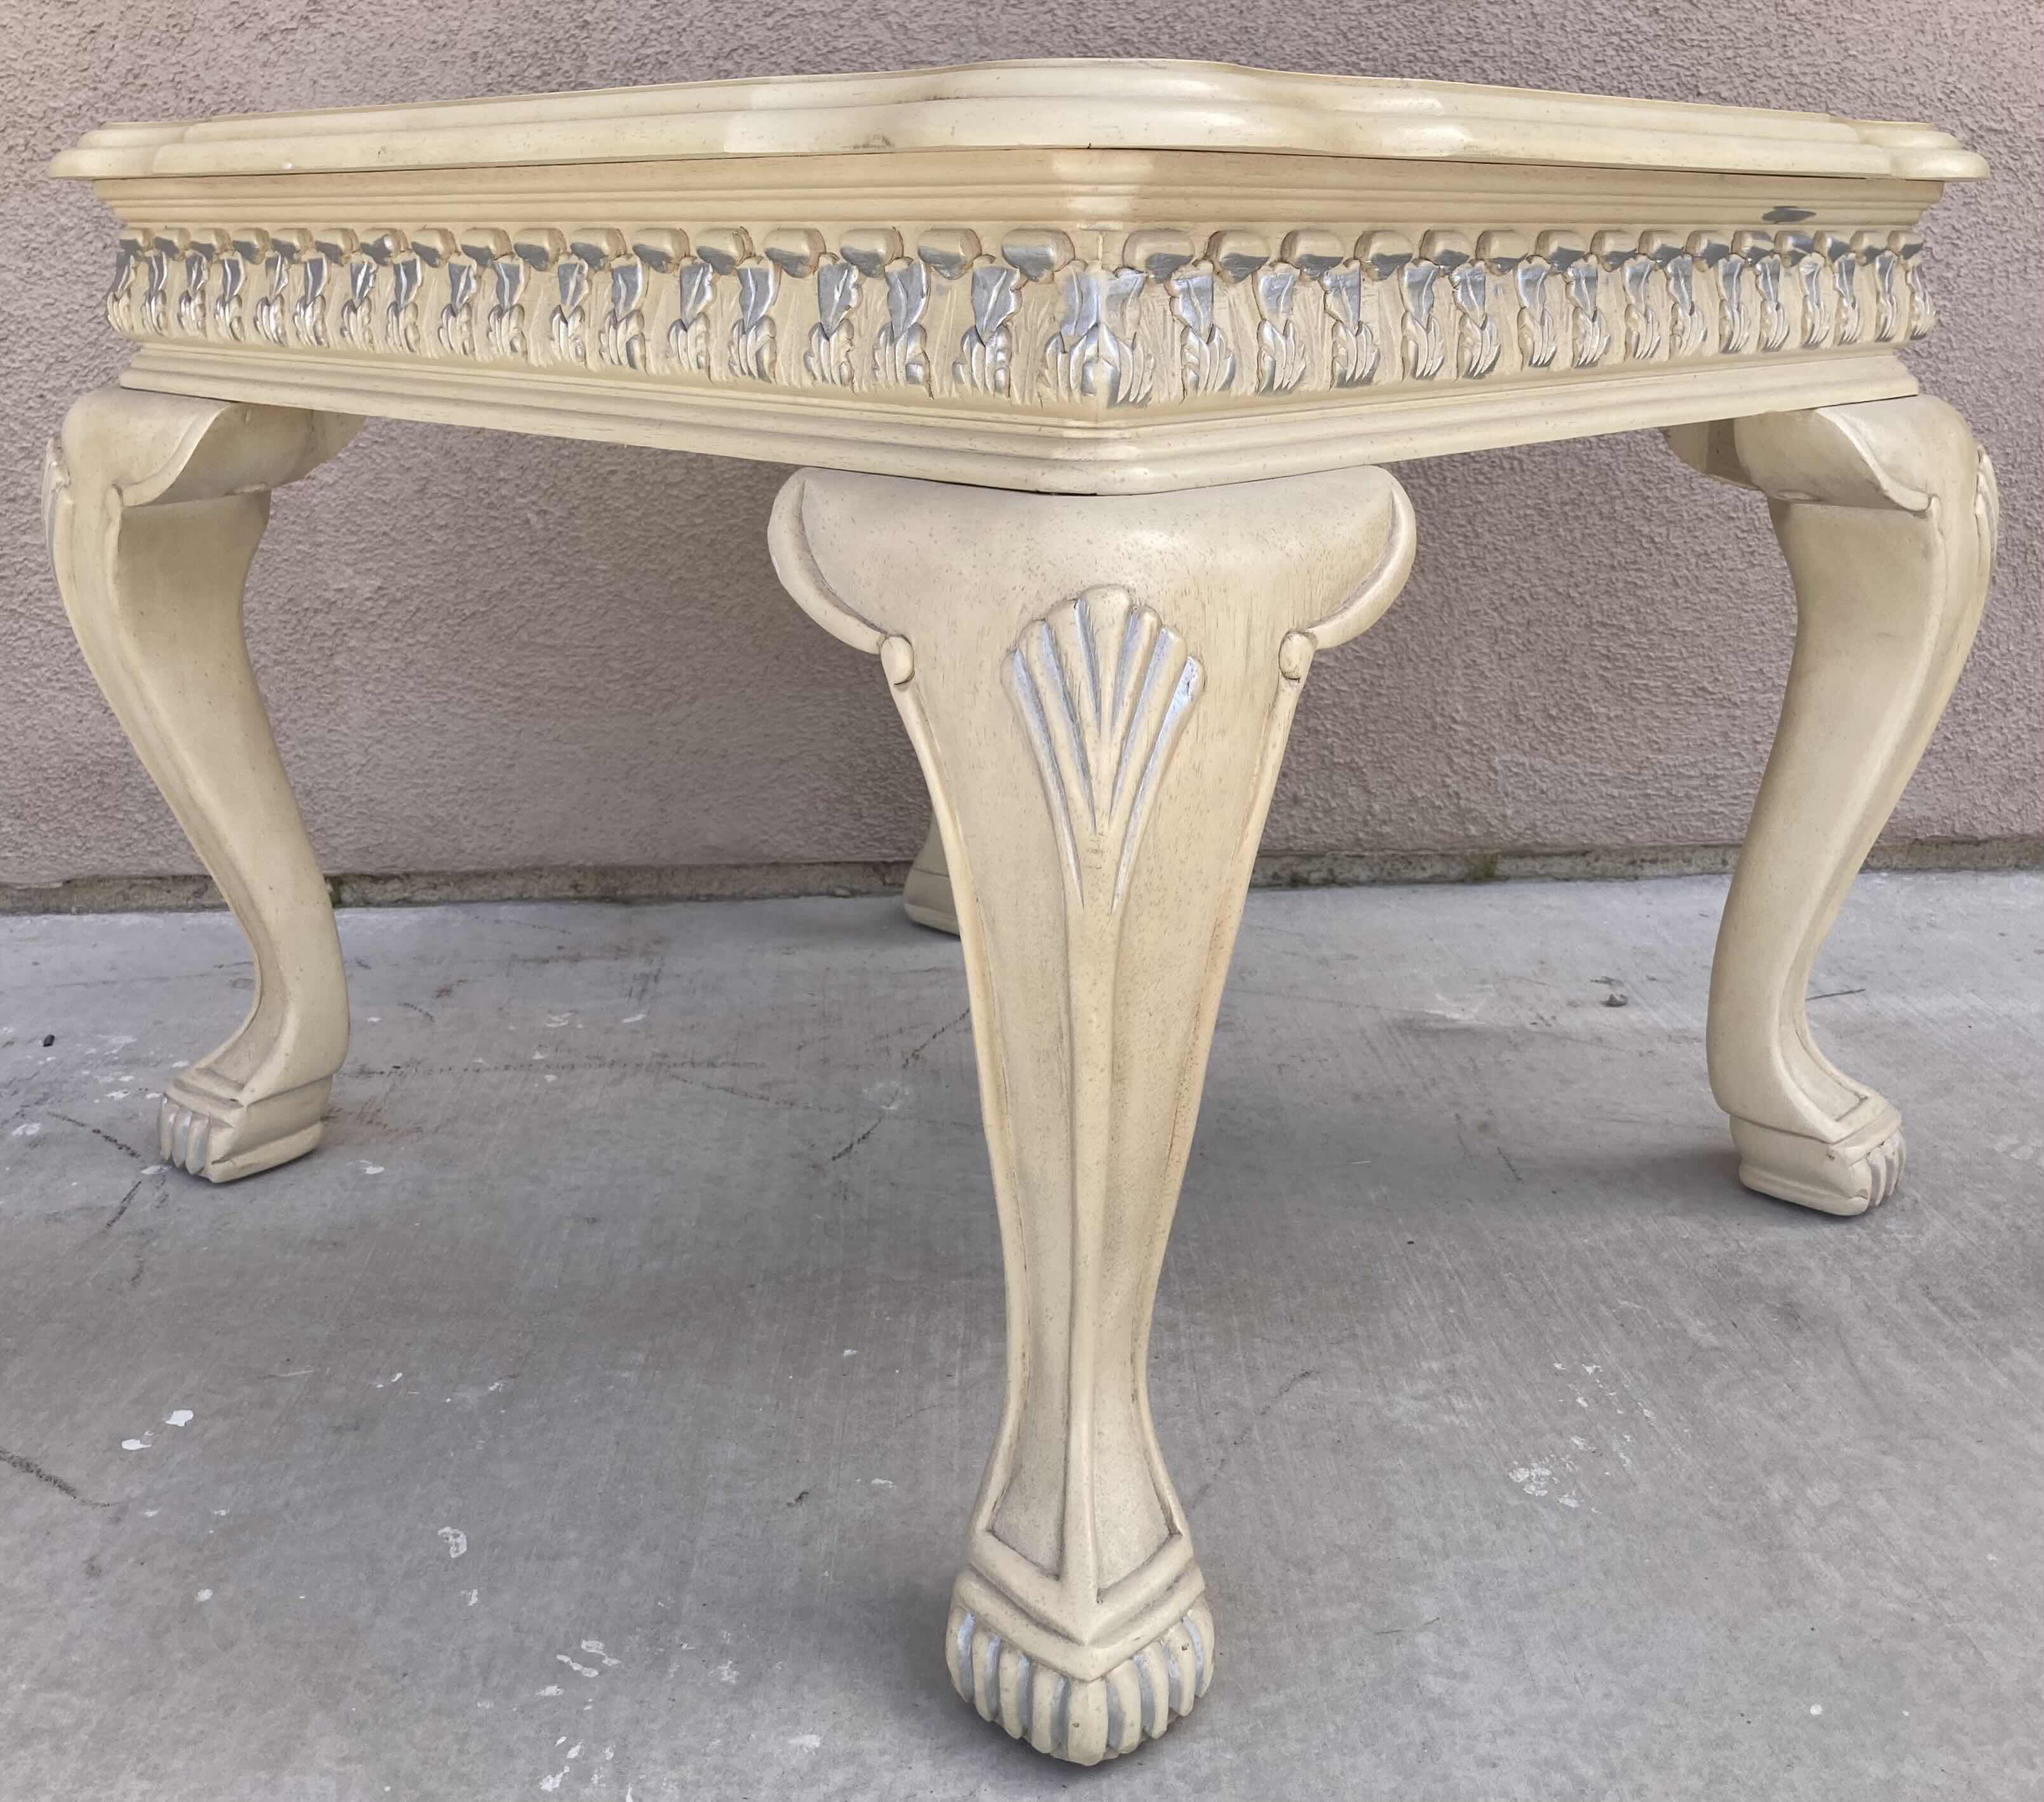 Photo 4 of MID-CENTURY STYLE CREAM W SILVER ACCENTED WOOD FINISH GLASS TOP INLAY END TABLE 25.5” X 28.5” H21.5”